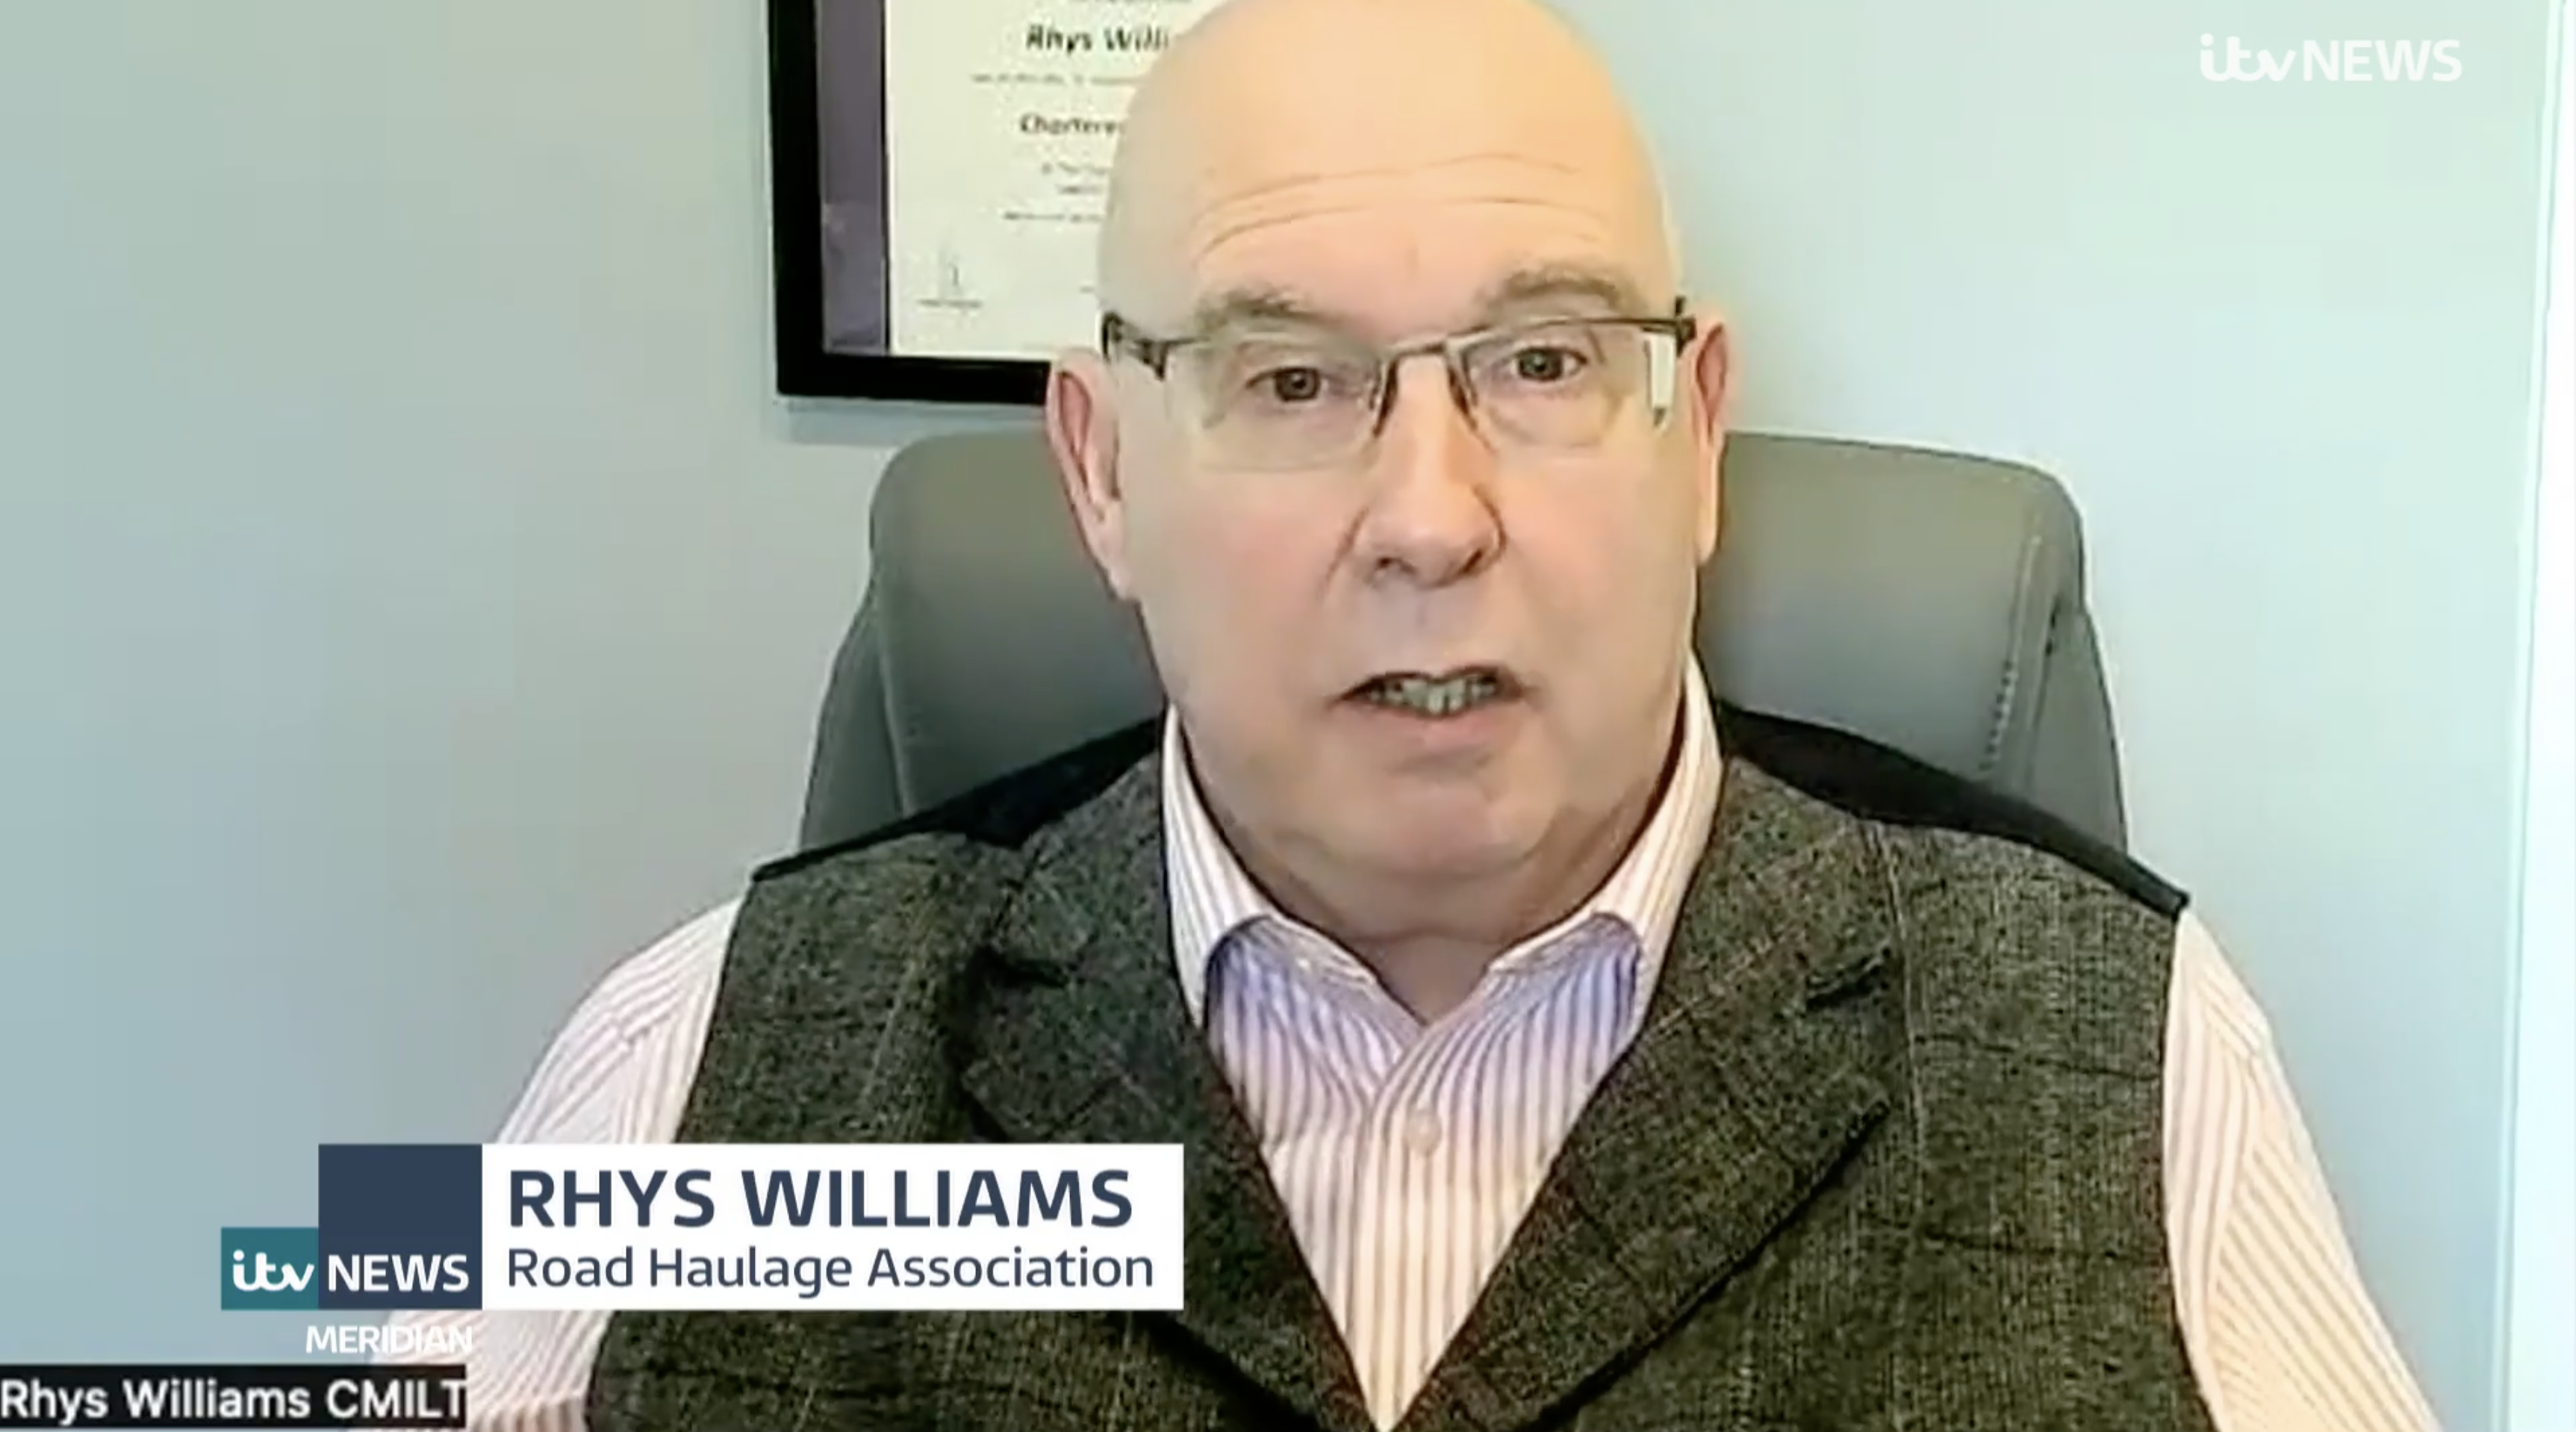 Henley-on-Thames: HGVs must be able to deliver to keep shops stocked – RHA on ITV